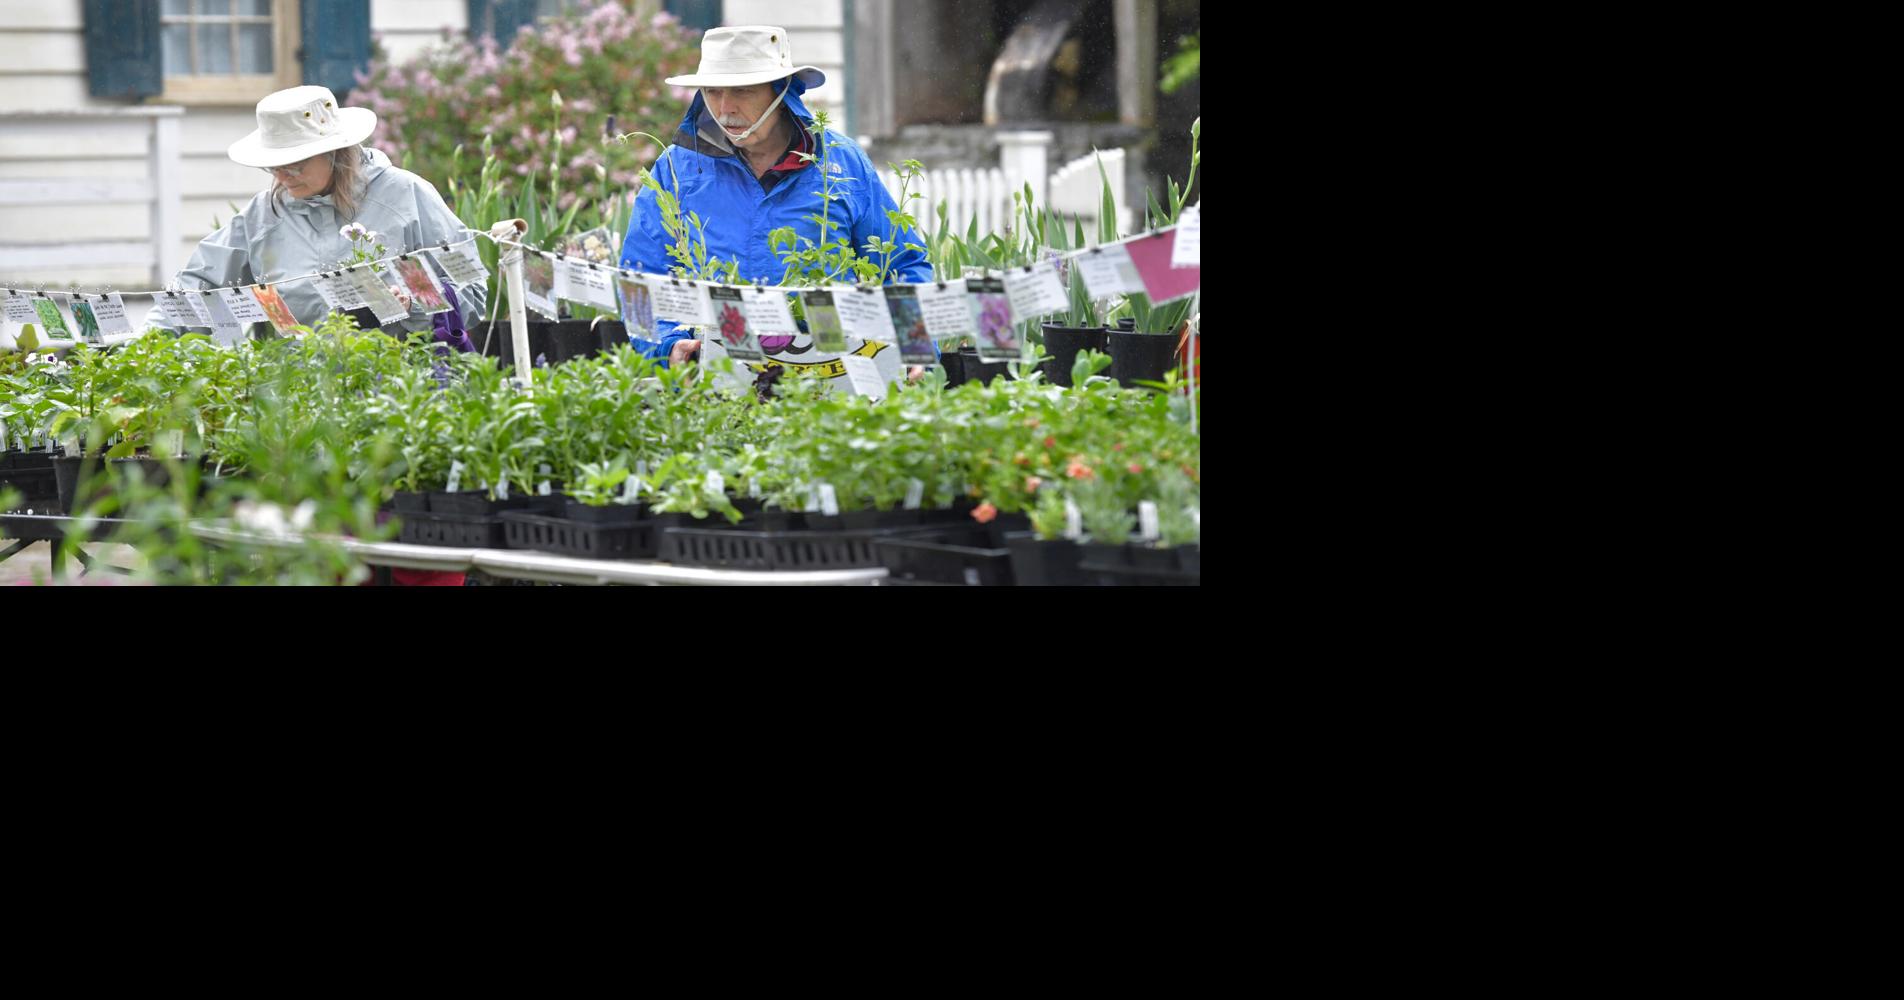 Gardeners flock to Landis Valley Village and Farm Museum for annual Herb and...